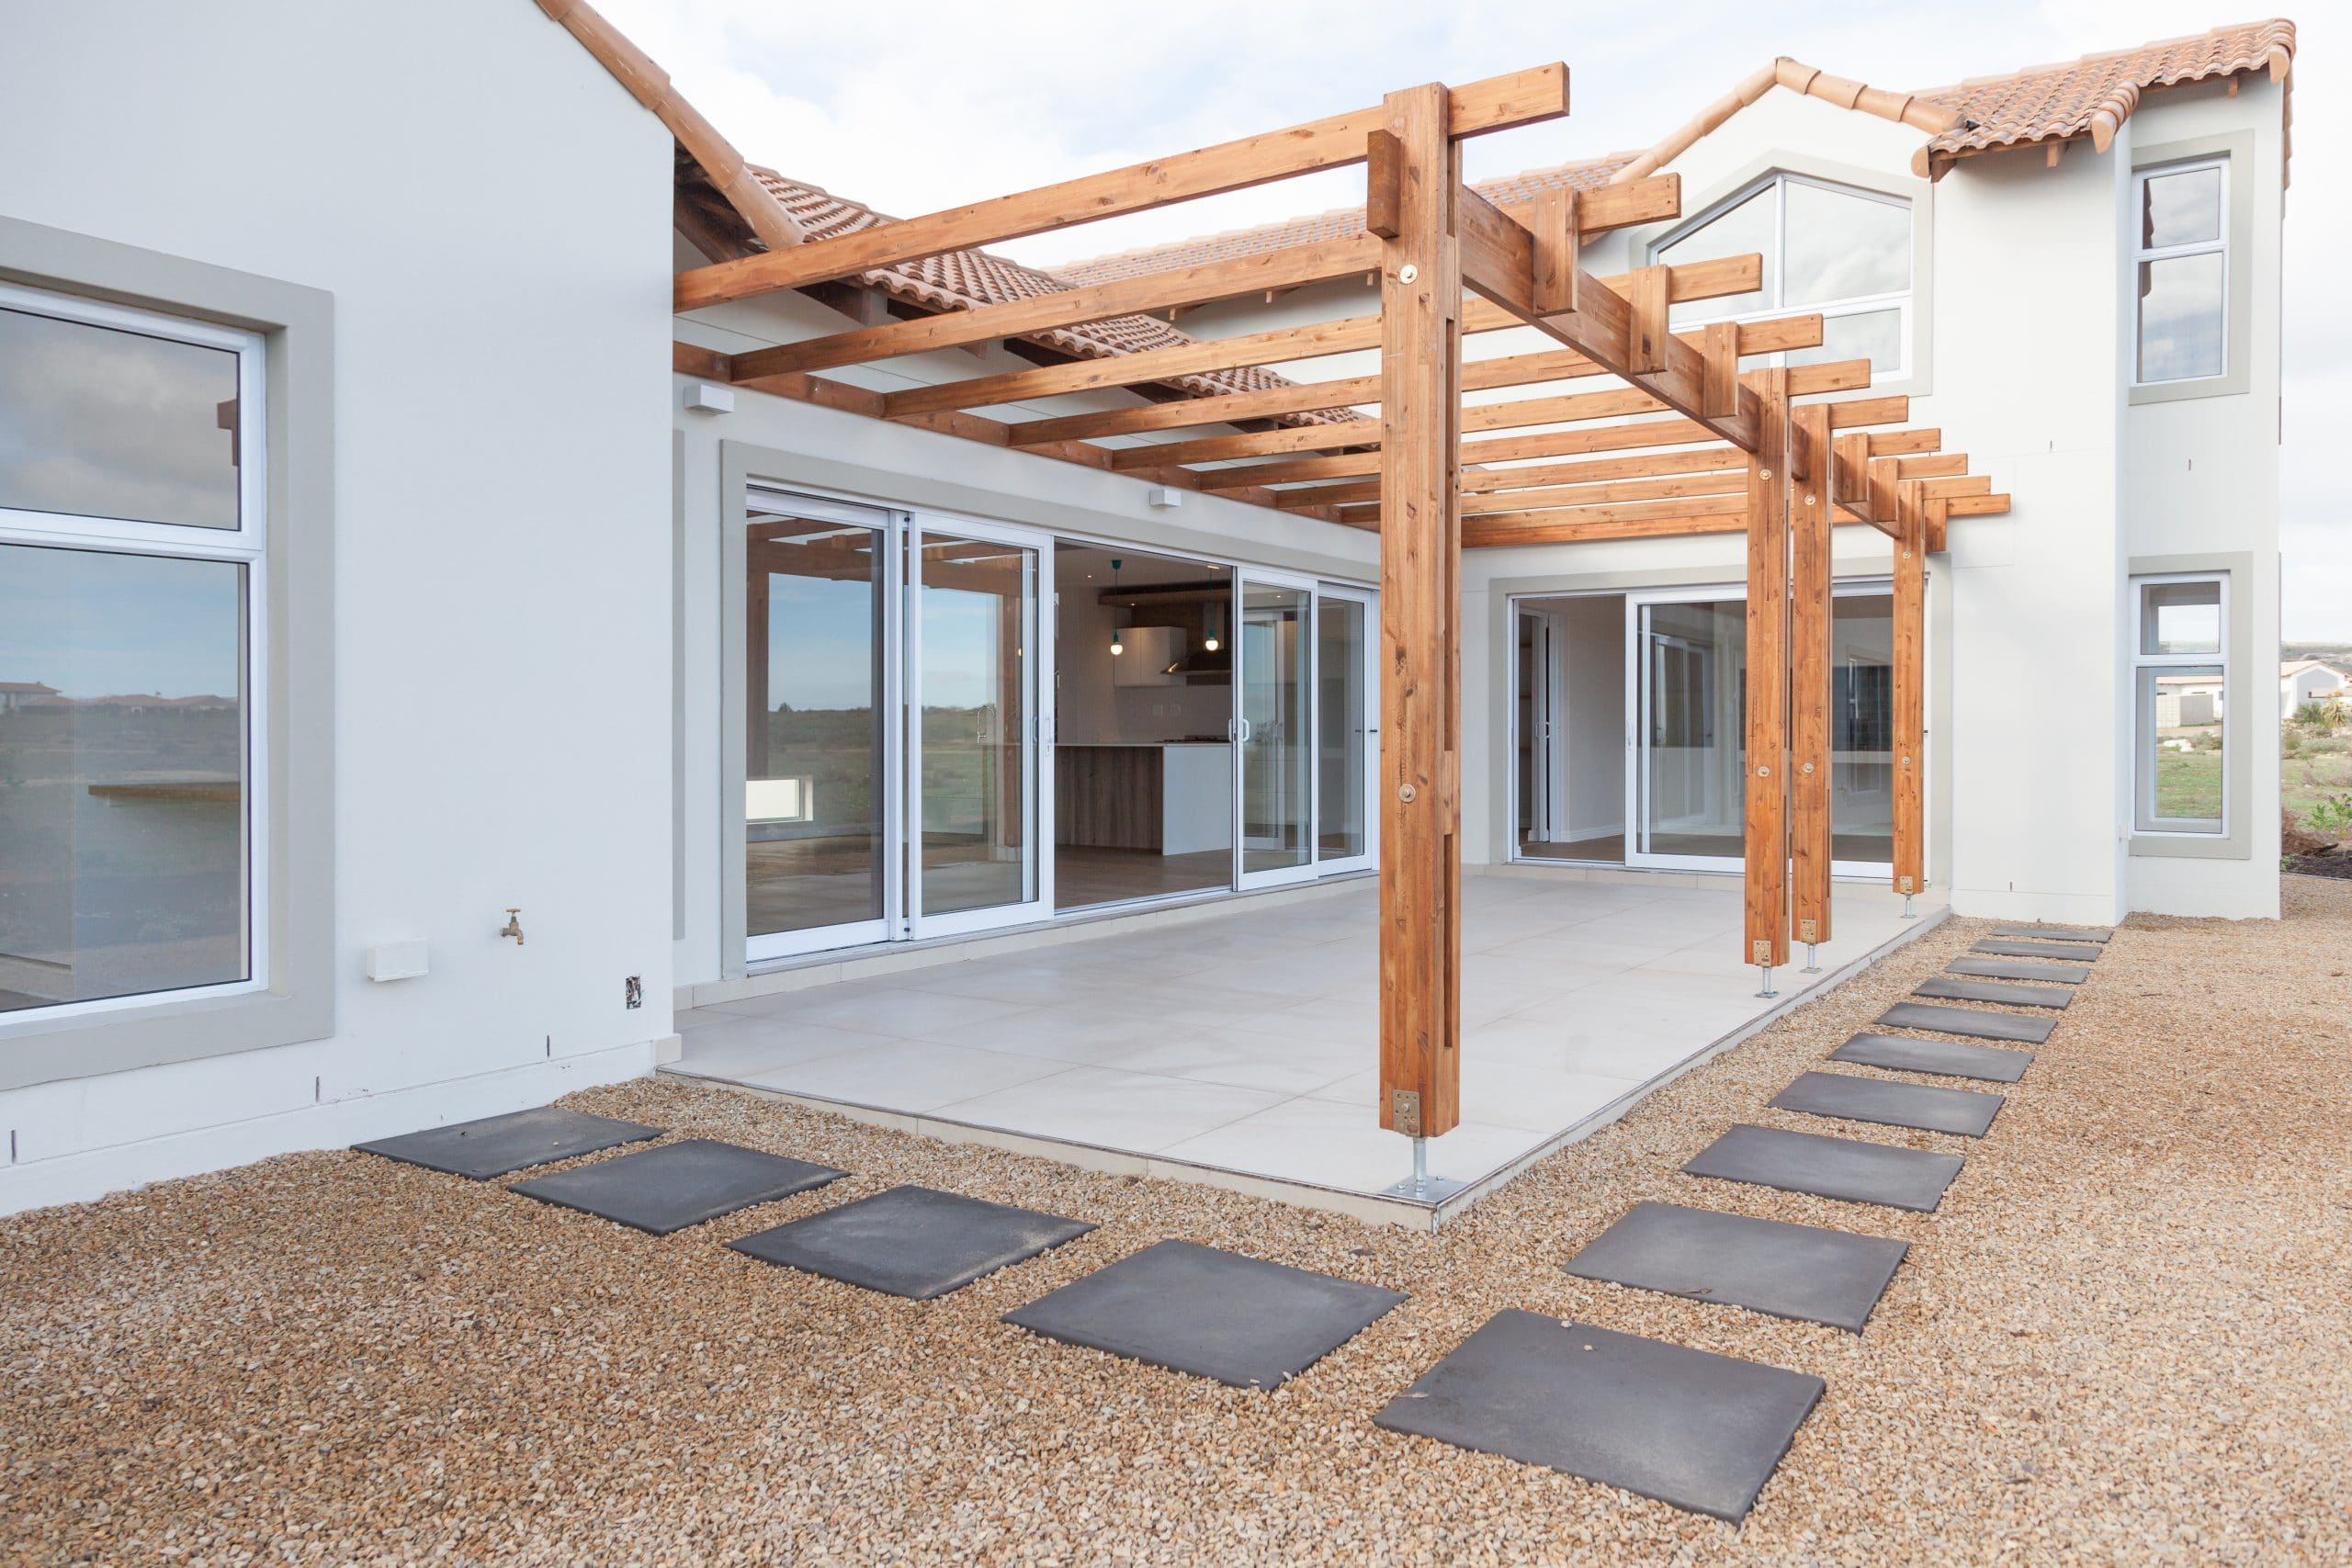 tiled open patio with wooden timber pergola langebaan country estate